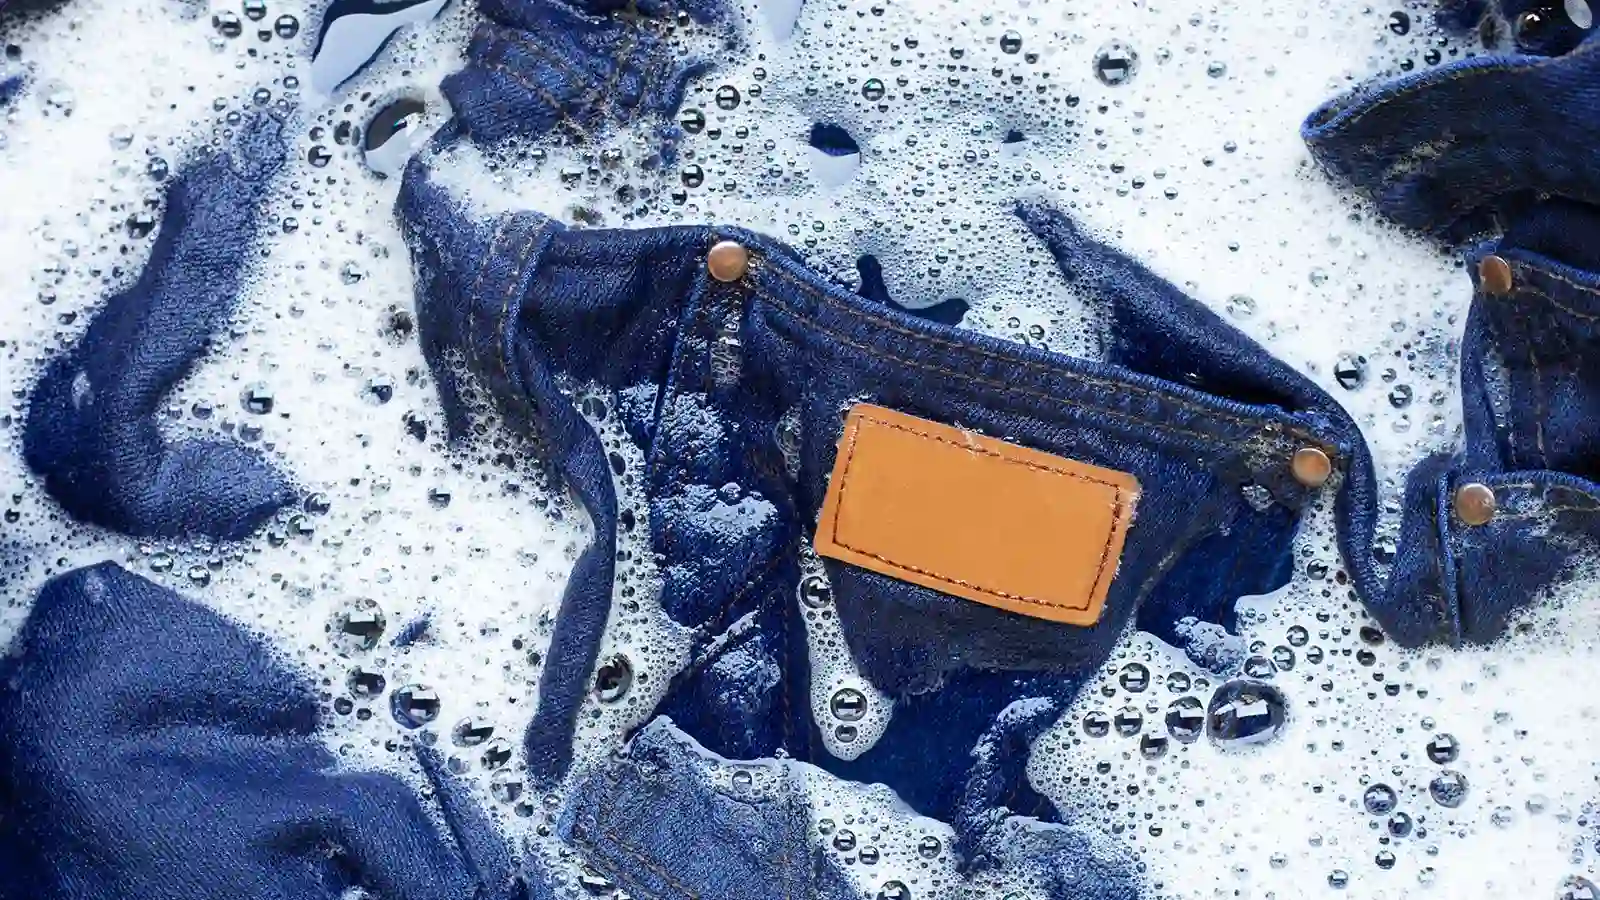 Wash your jeans